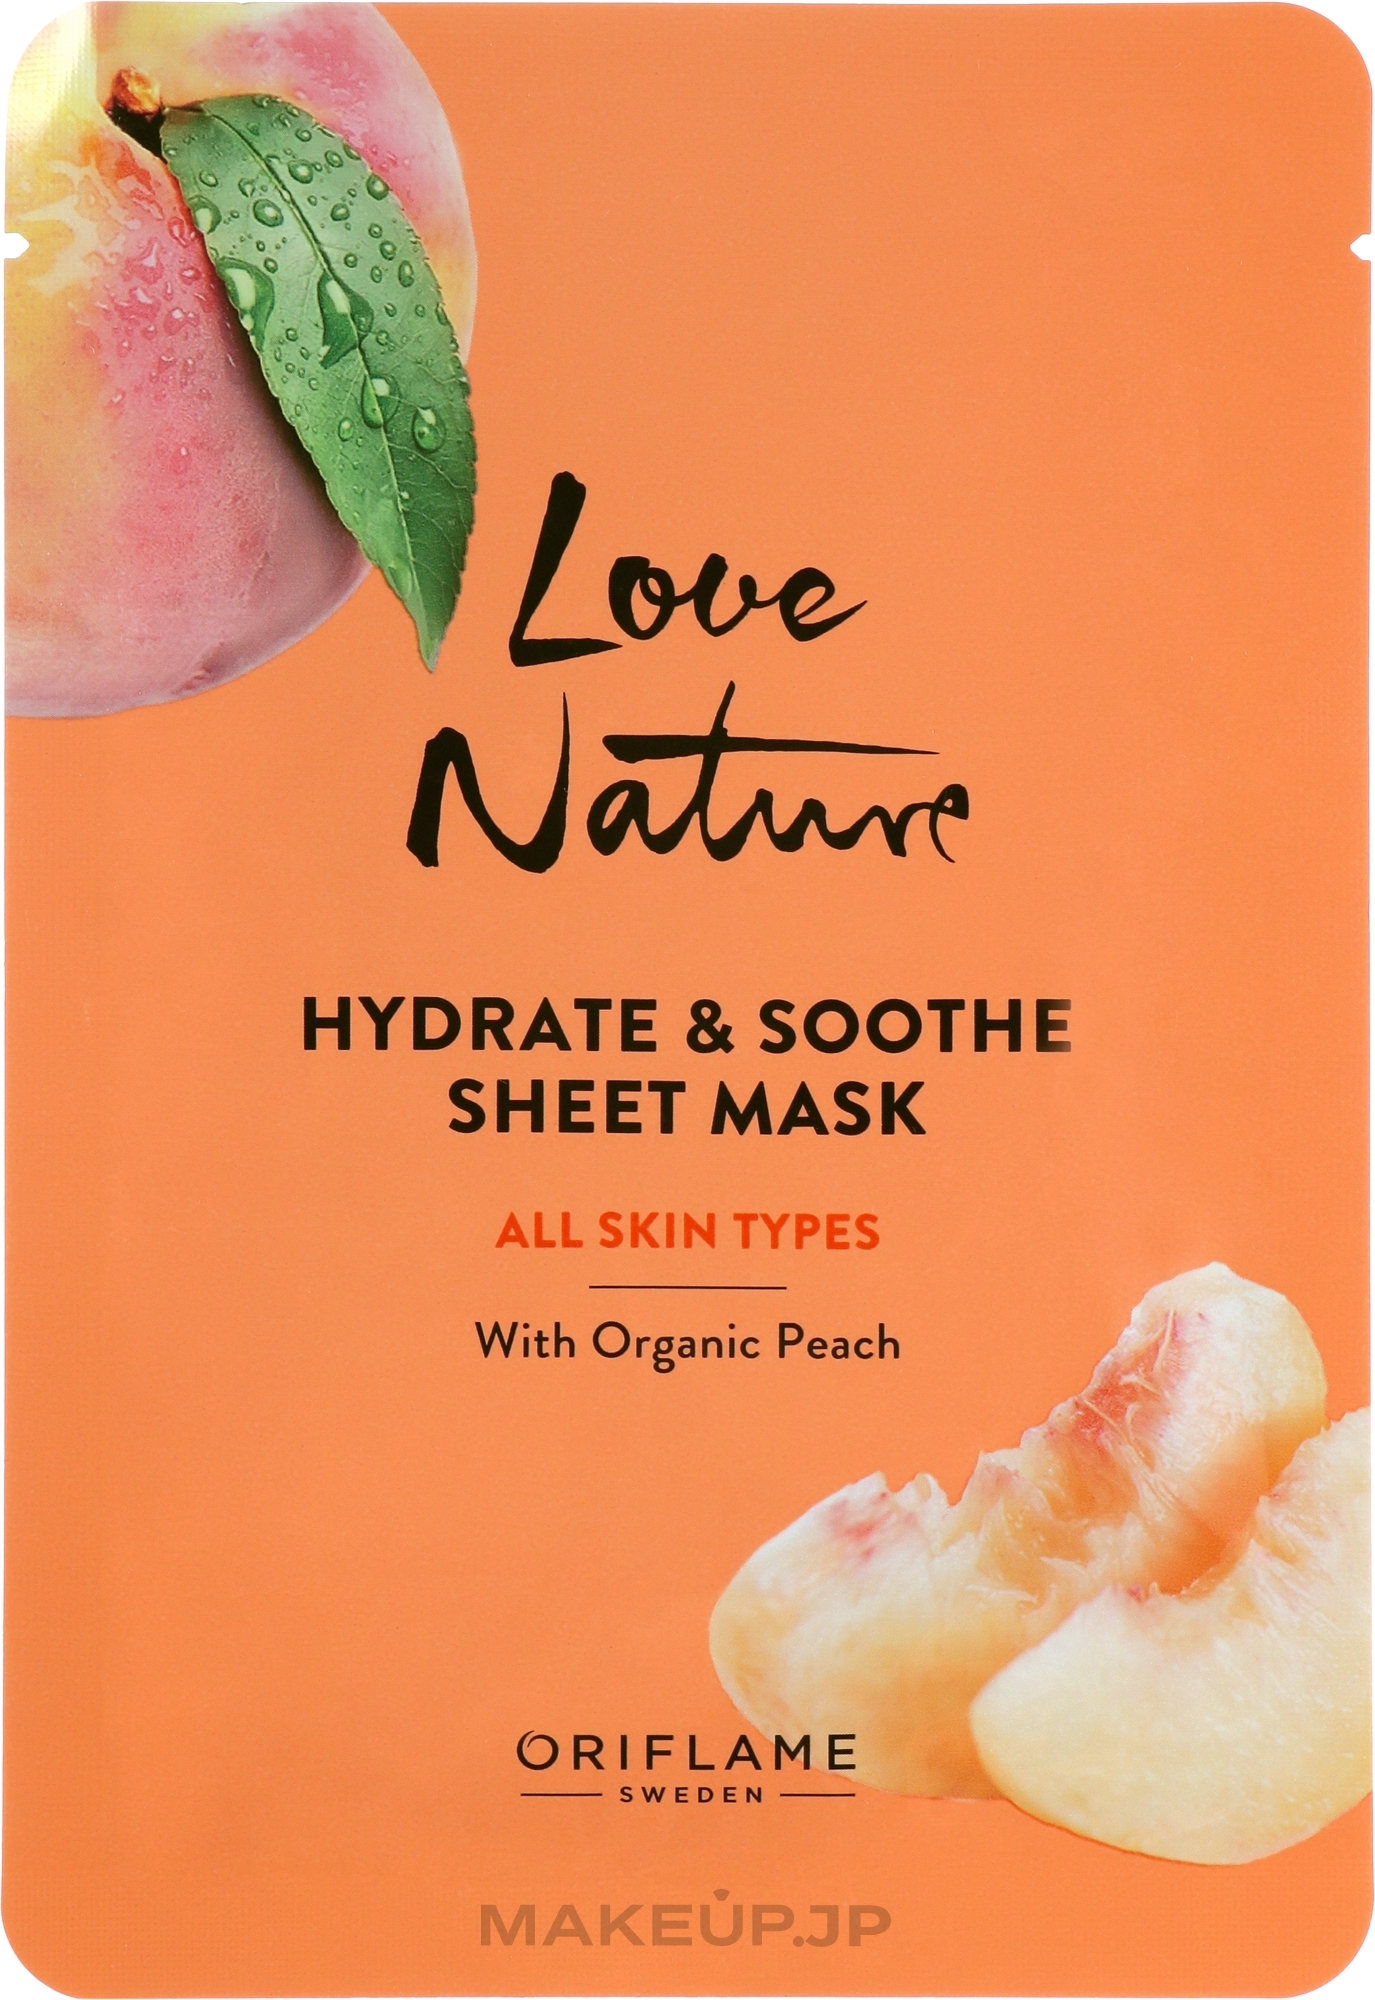 Smoothing Peach Sheet Mask - Oriflame Love Nature Hydrate & Soothe Sheet Mask — photo 24 ml